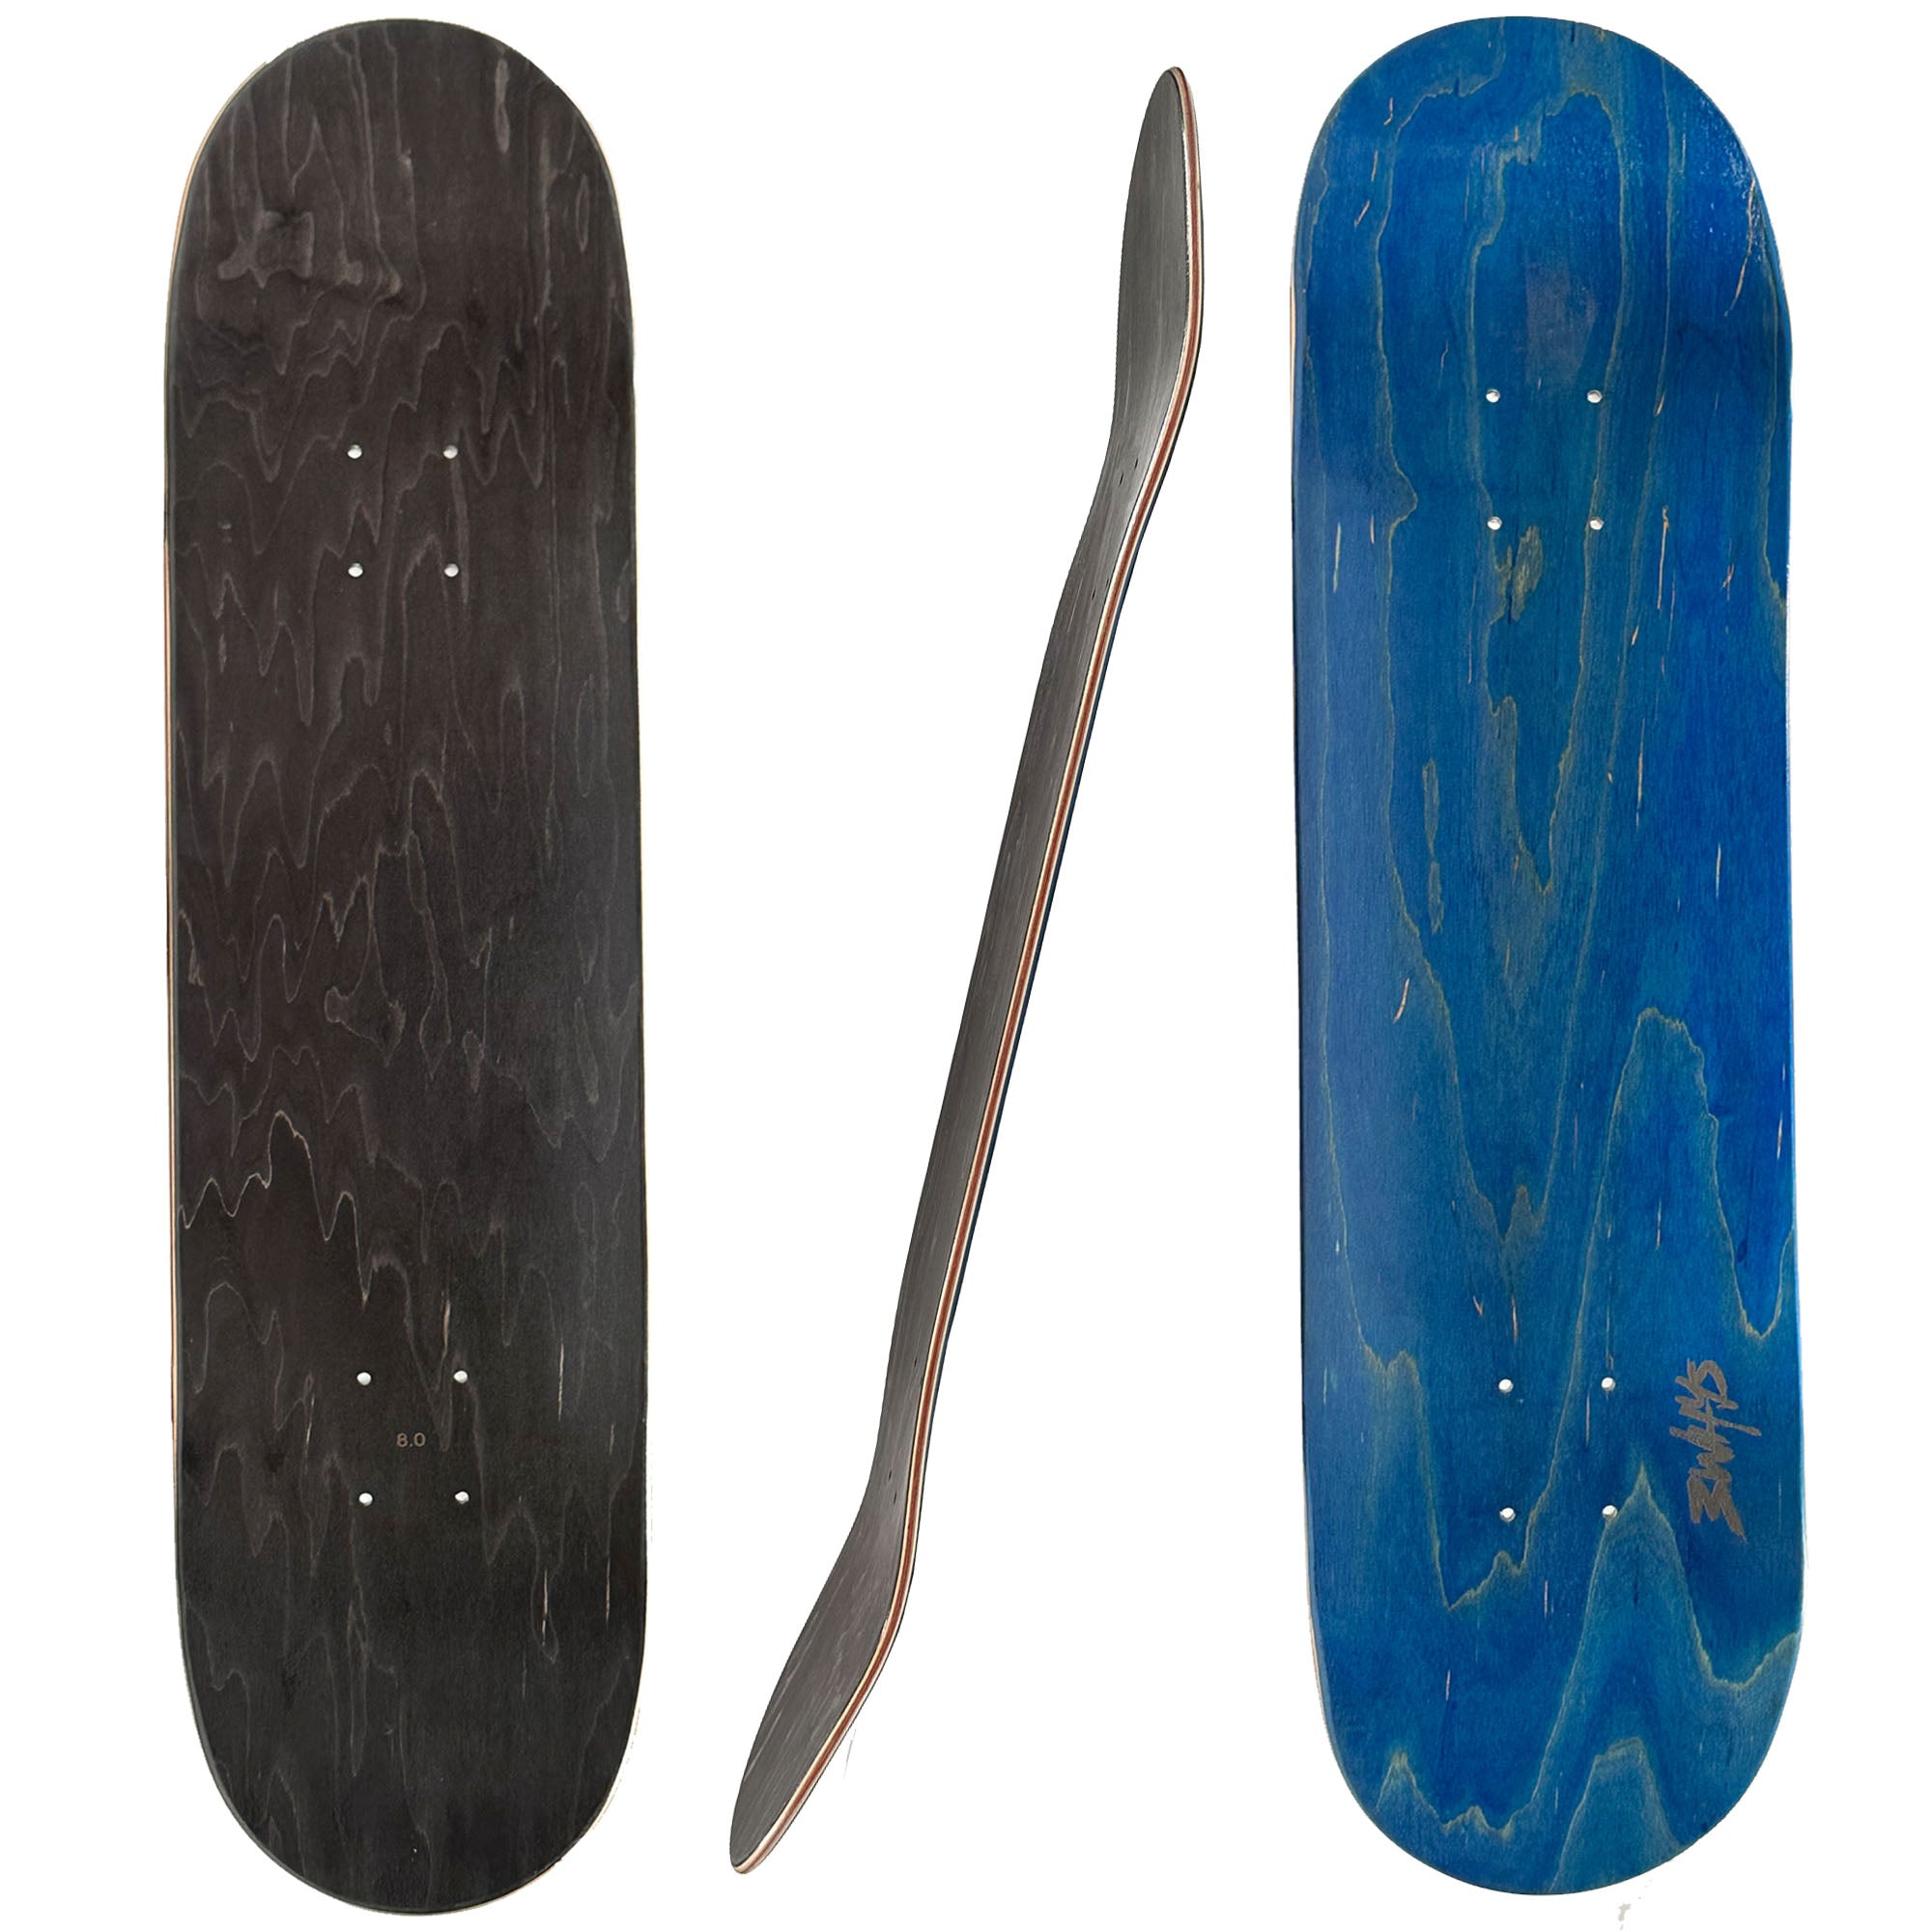 3WHYS 7-Ply Canadian Maple Skateboard Deck